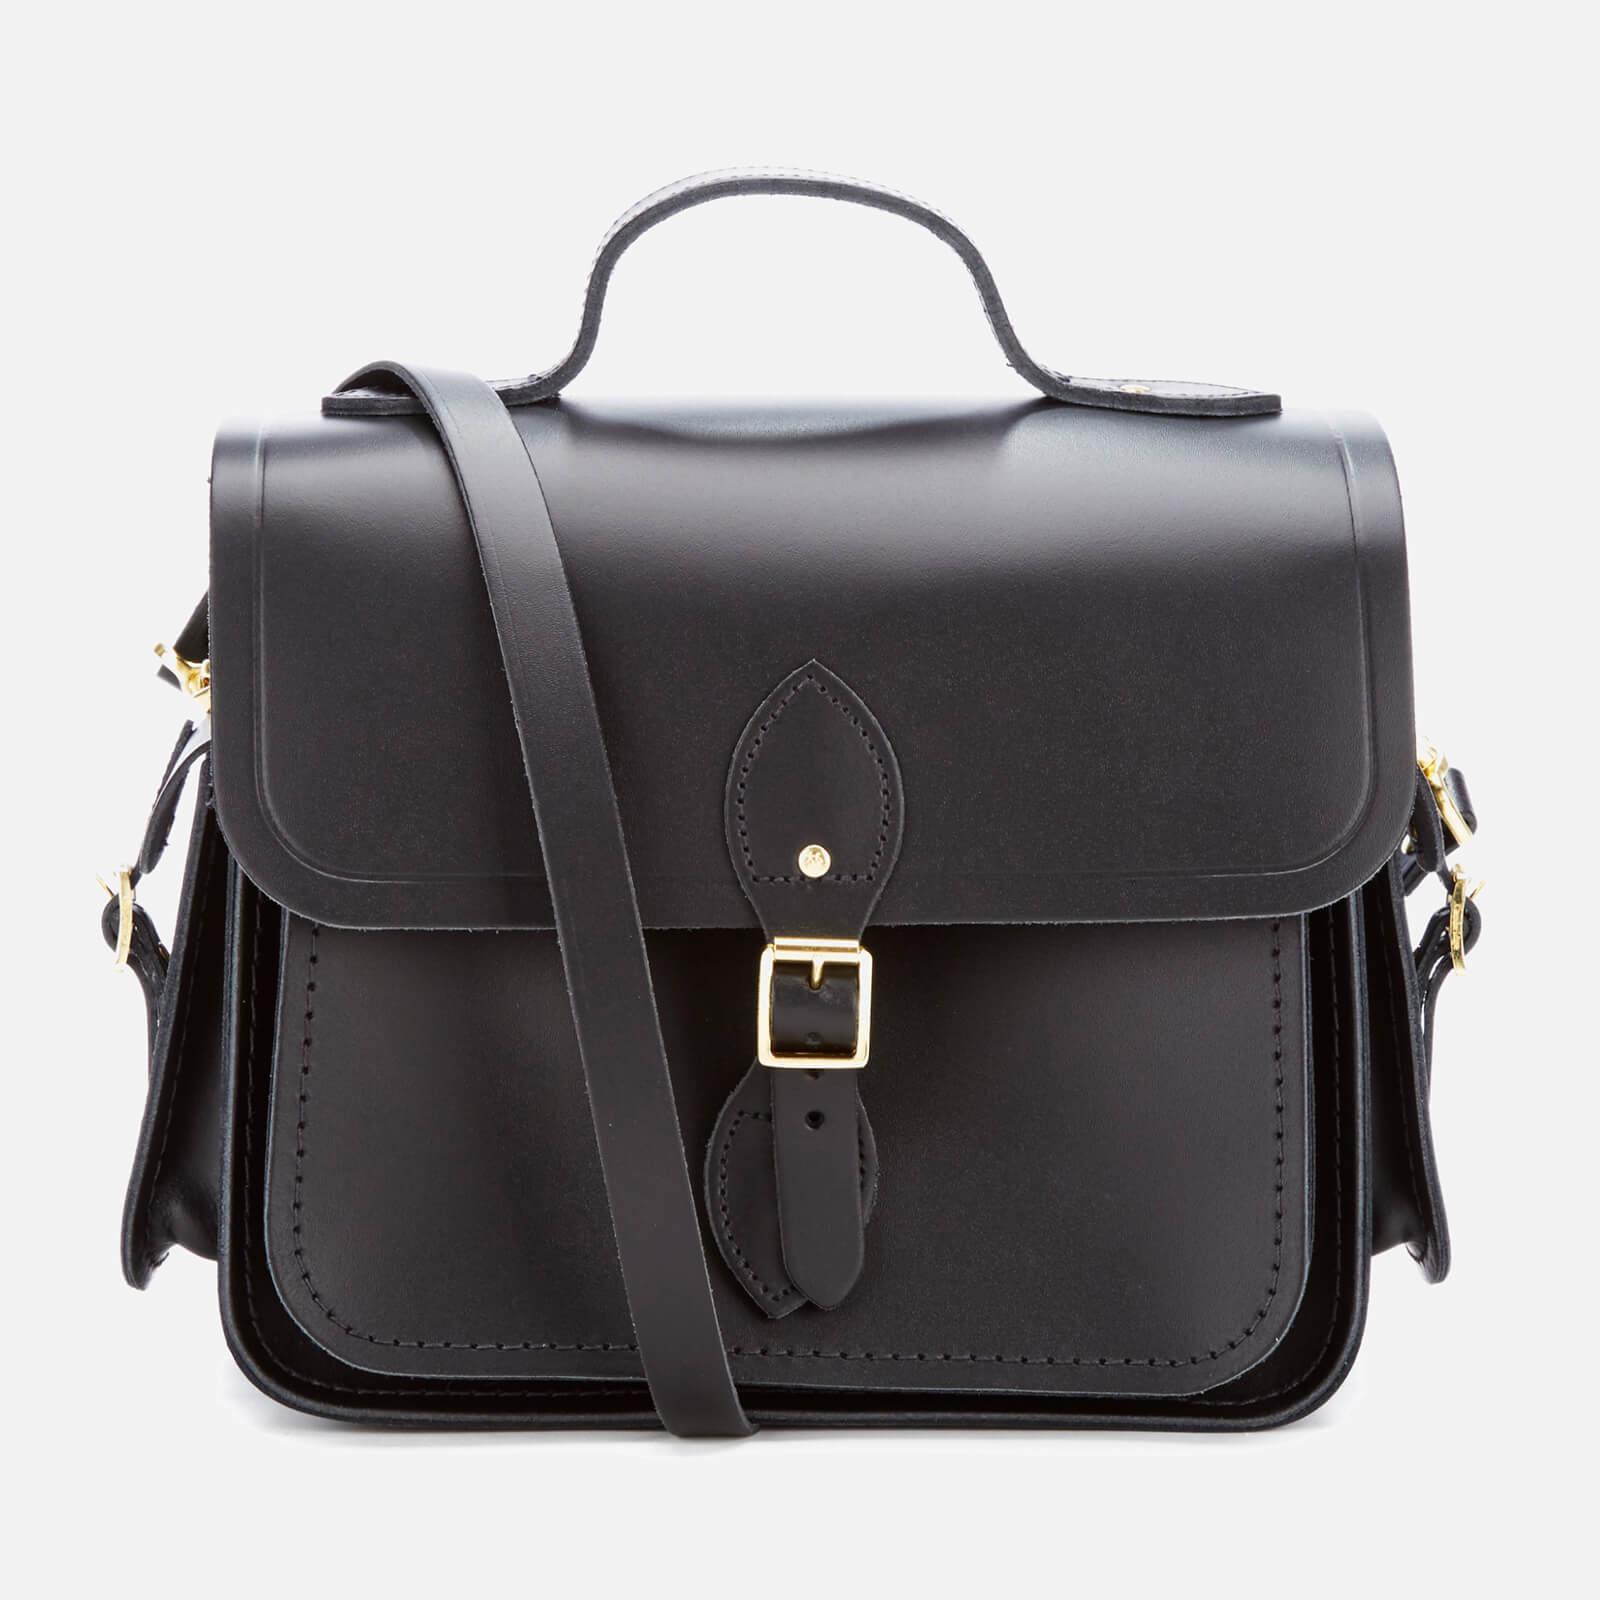 Cambridge Satchel Company Women's Large Traveller Bag With Side Pockets in  Black | Lyst